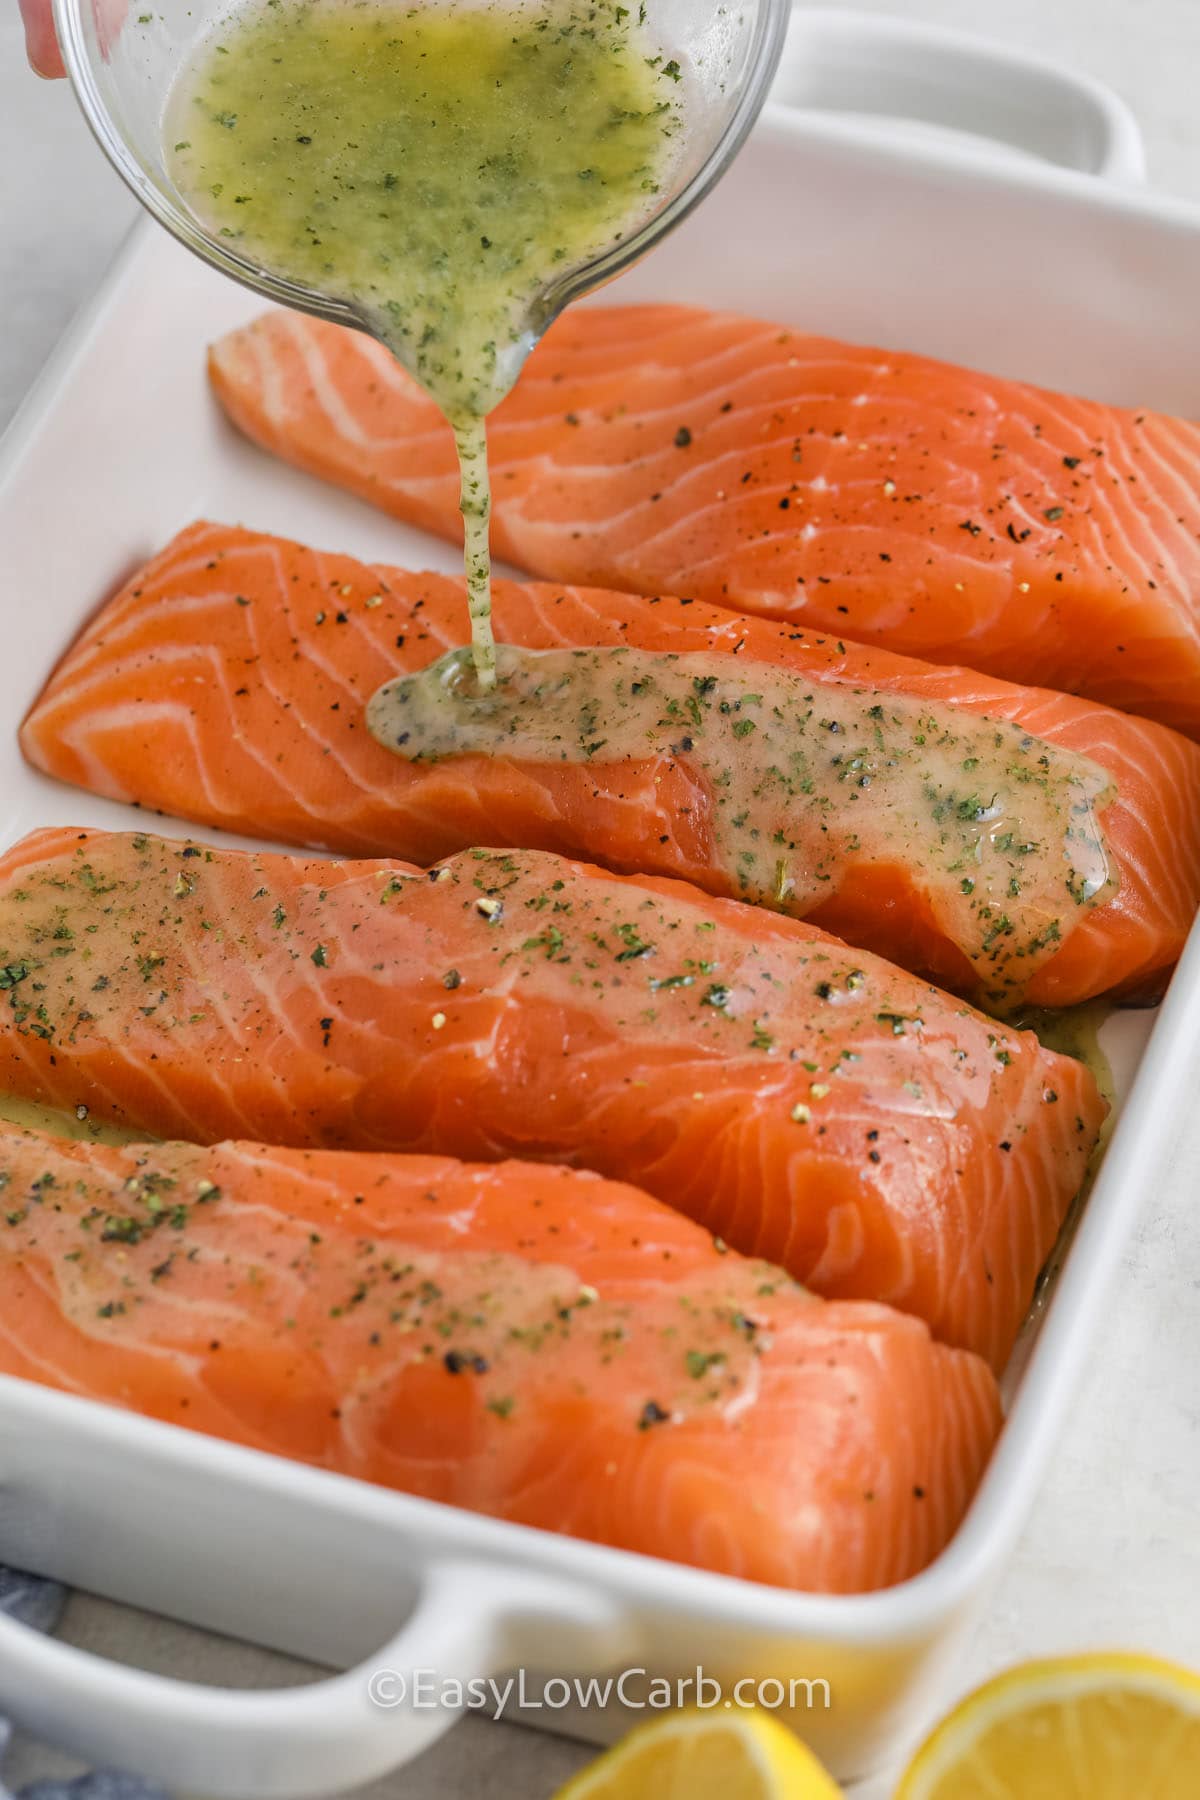 garlic butter being poured over salmon filets in a baking dish